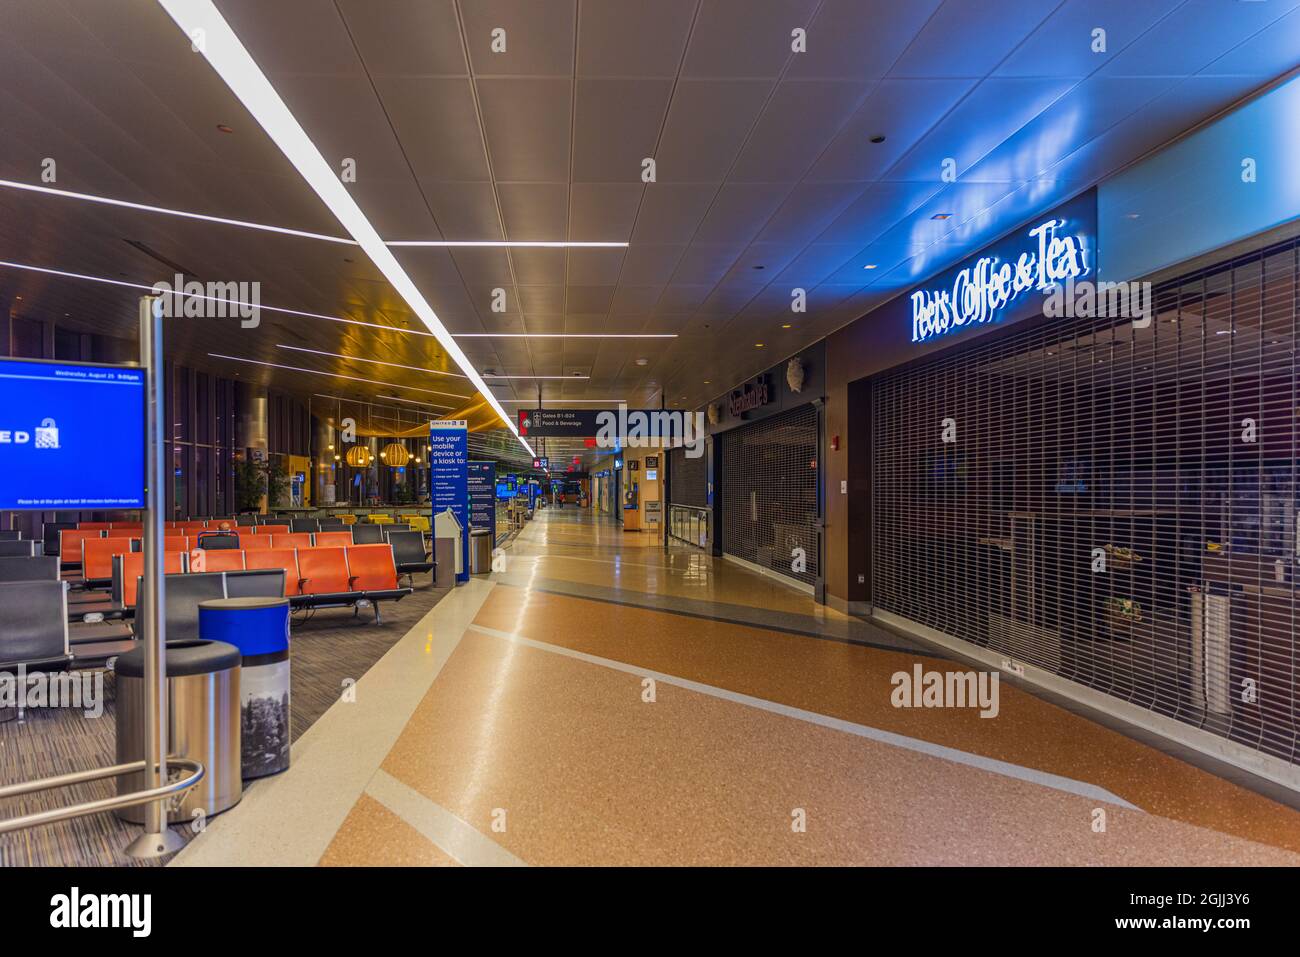 NEWARK, NJ - AUGUST 28: Newark Airport interior on August 28, 2021 in Newark, New Jersey. All shops closed upon late arrival. Stock Photo